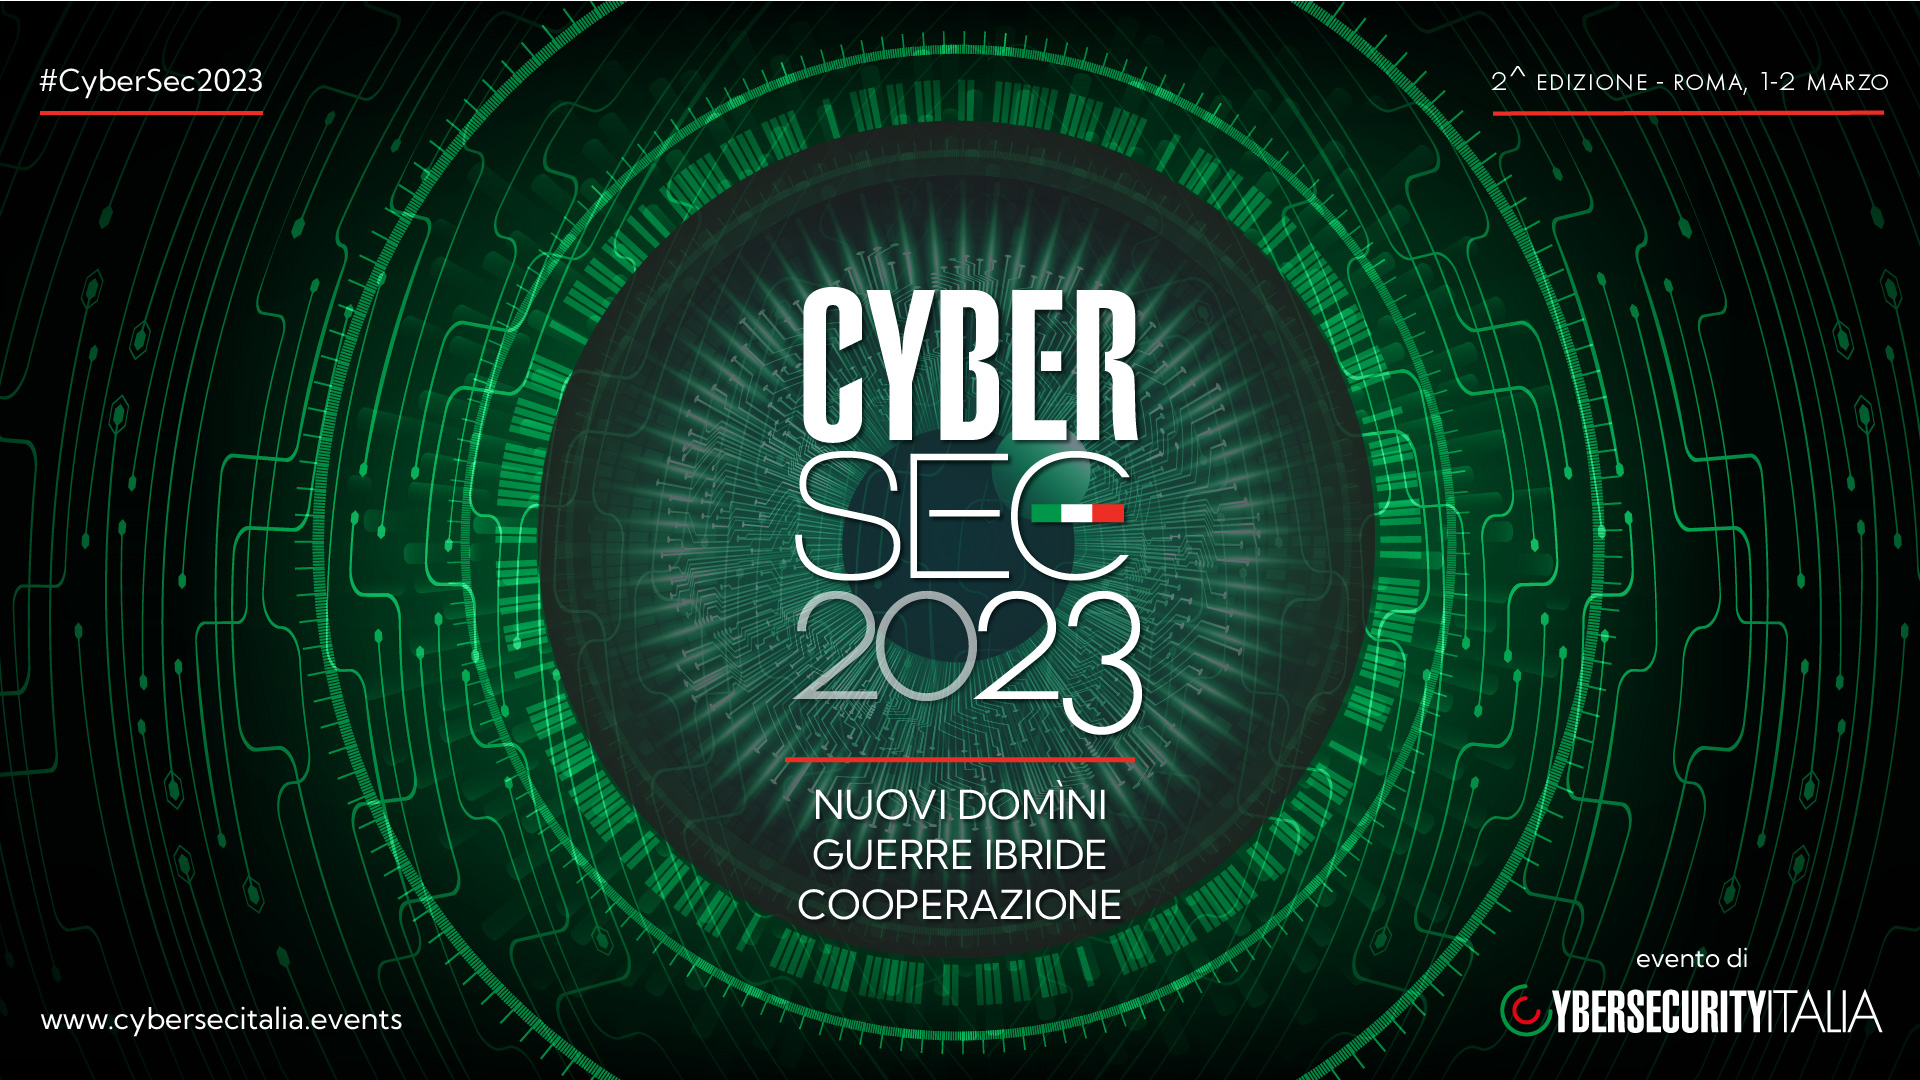 CyberSec2023 Expo Conference